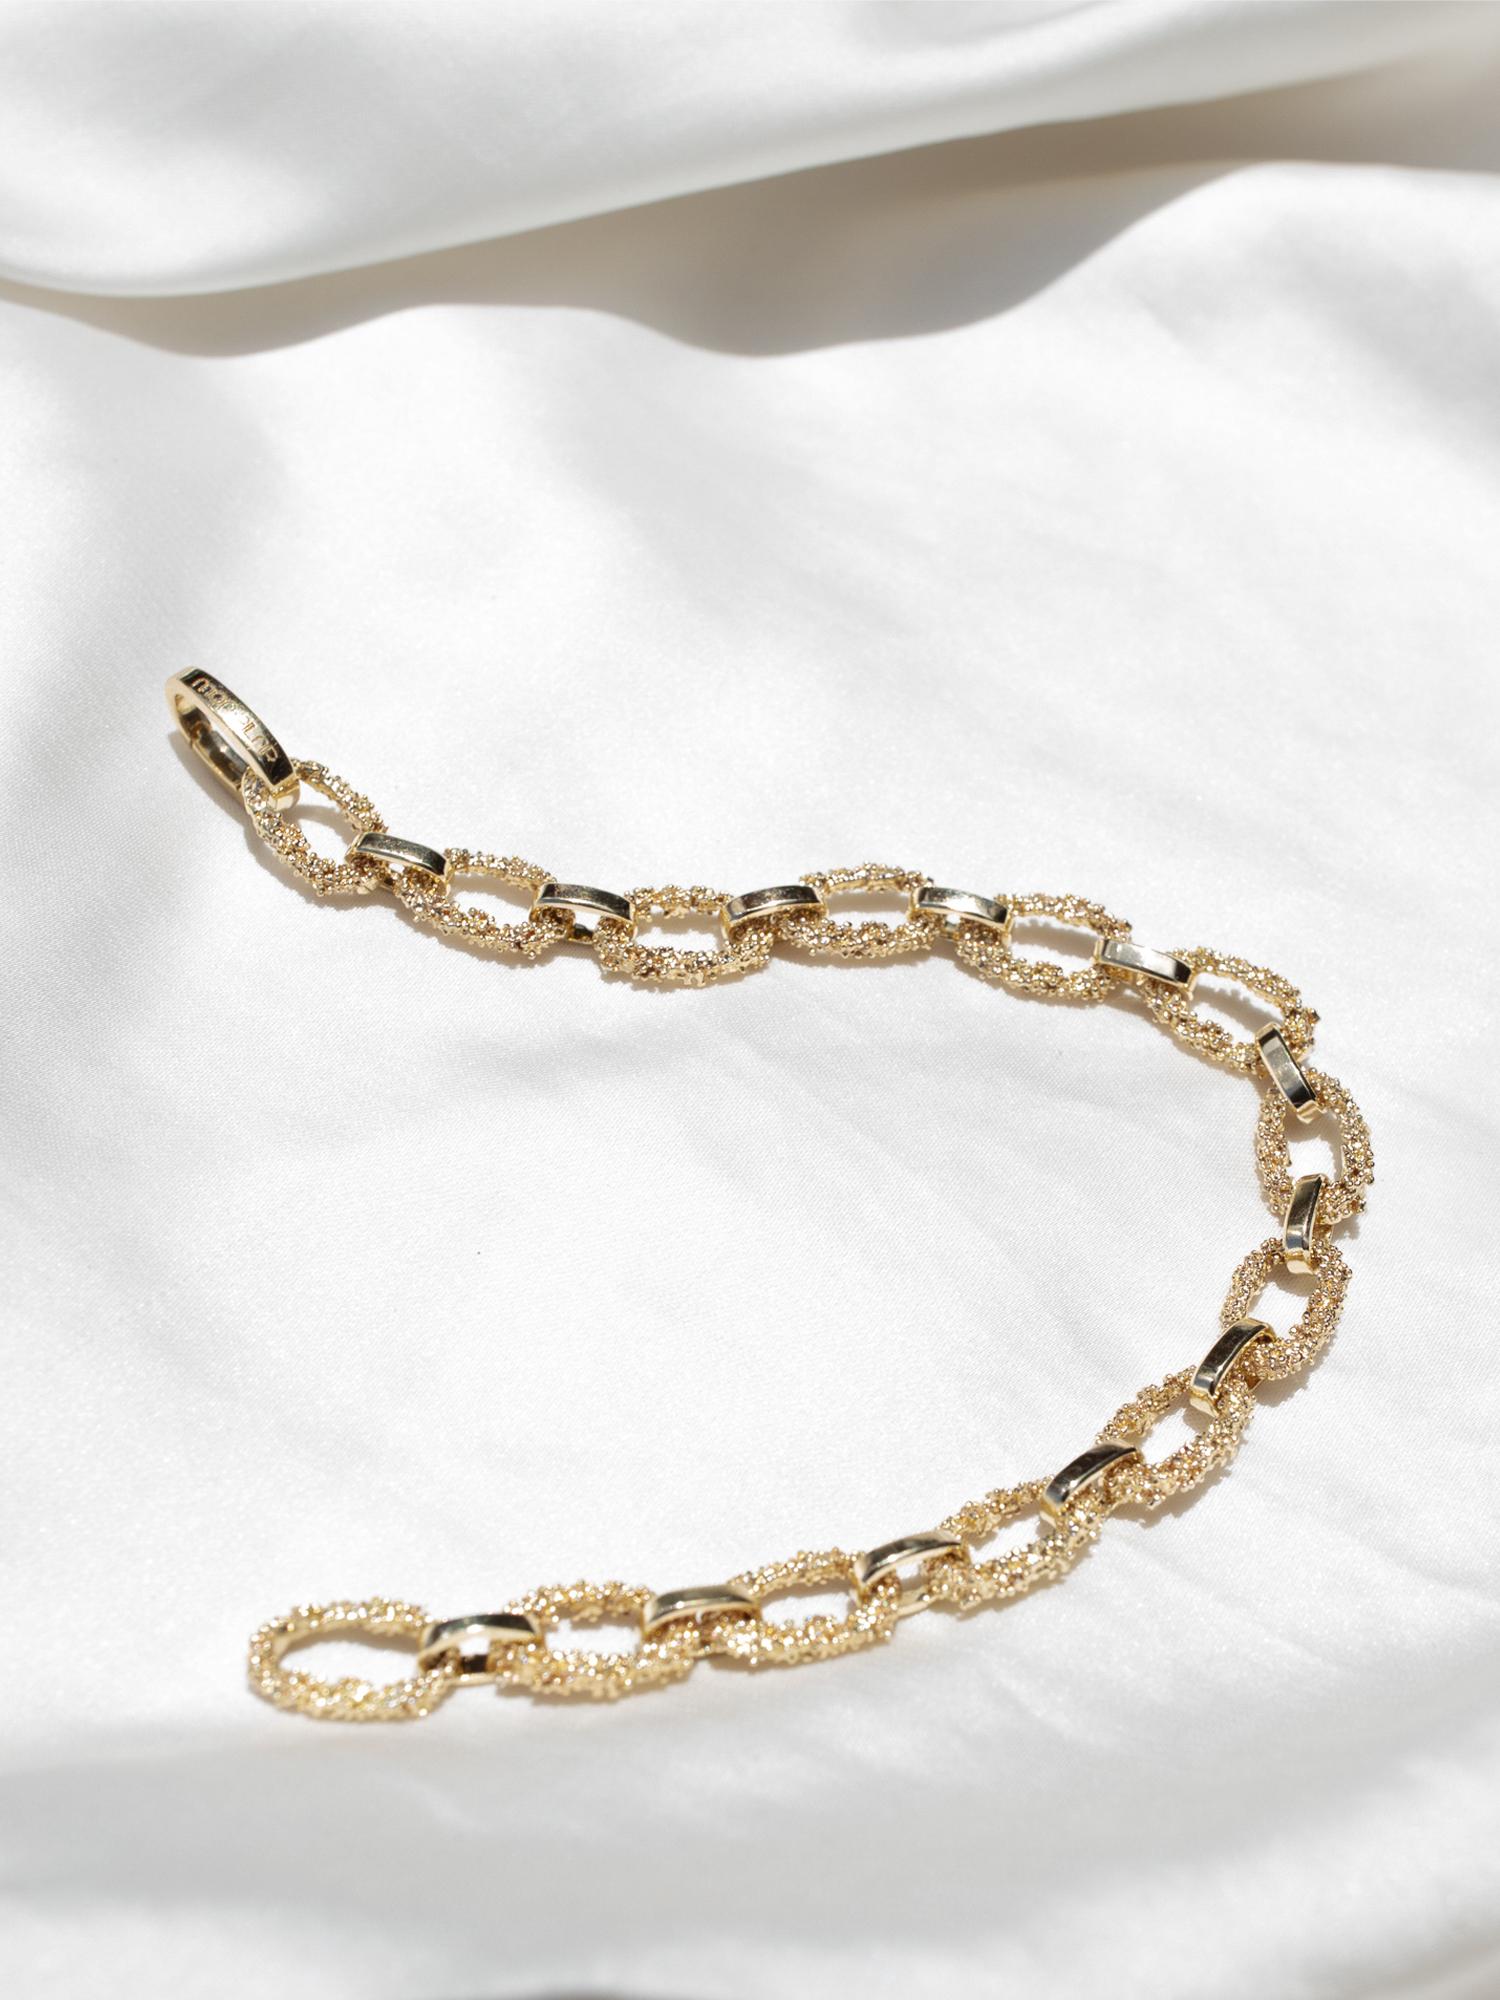 An ode to ancient granulation and sandy shores, this bracelet speaks of nostalgia and sunny days. The ultimate show stopper, the Isla Bracelet is hand-crafted link by link and features a seamless oval spring clasp for easy and solo fastening.
•